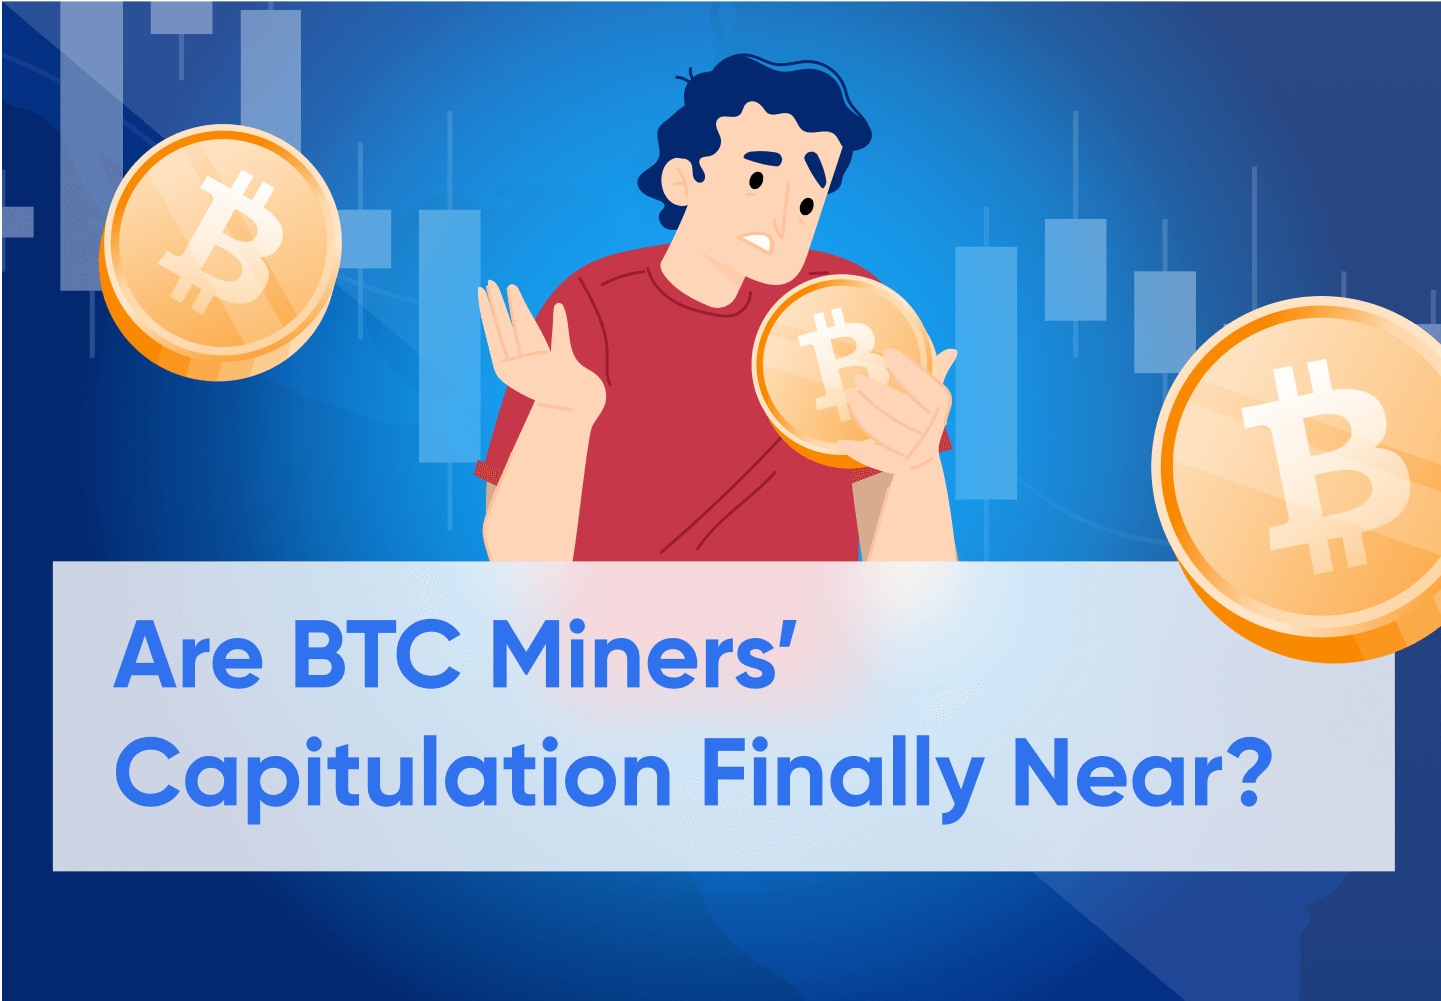 Signs that BTC Miners Could Be Capitulating Hint of Bear Market End in Sight